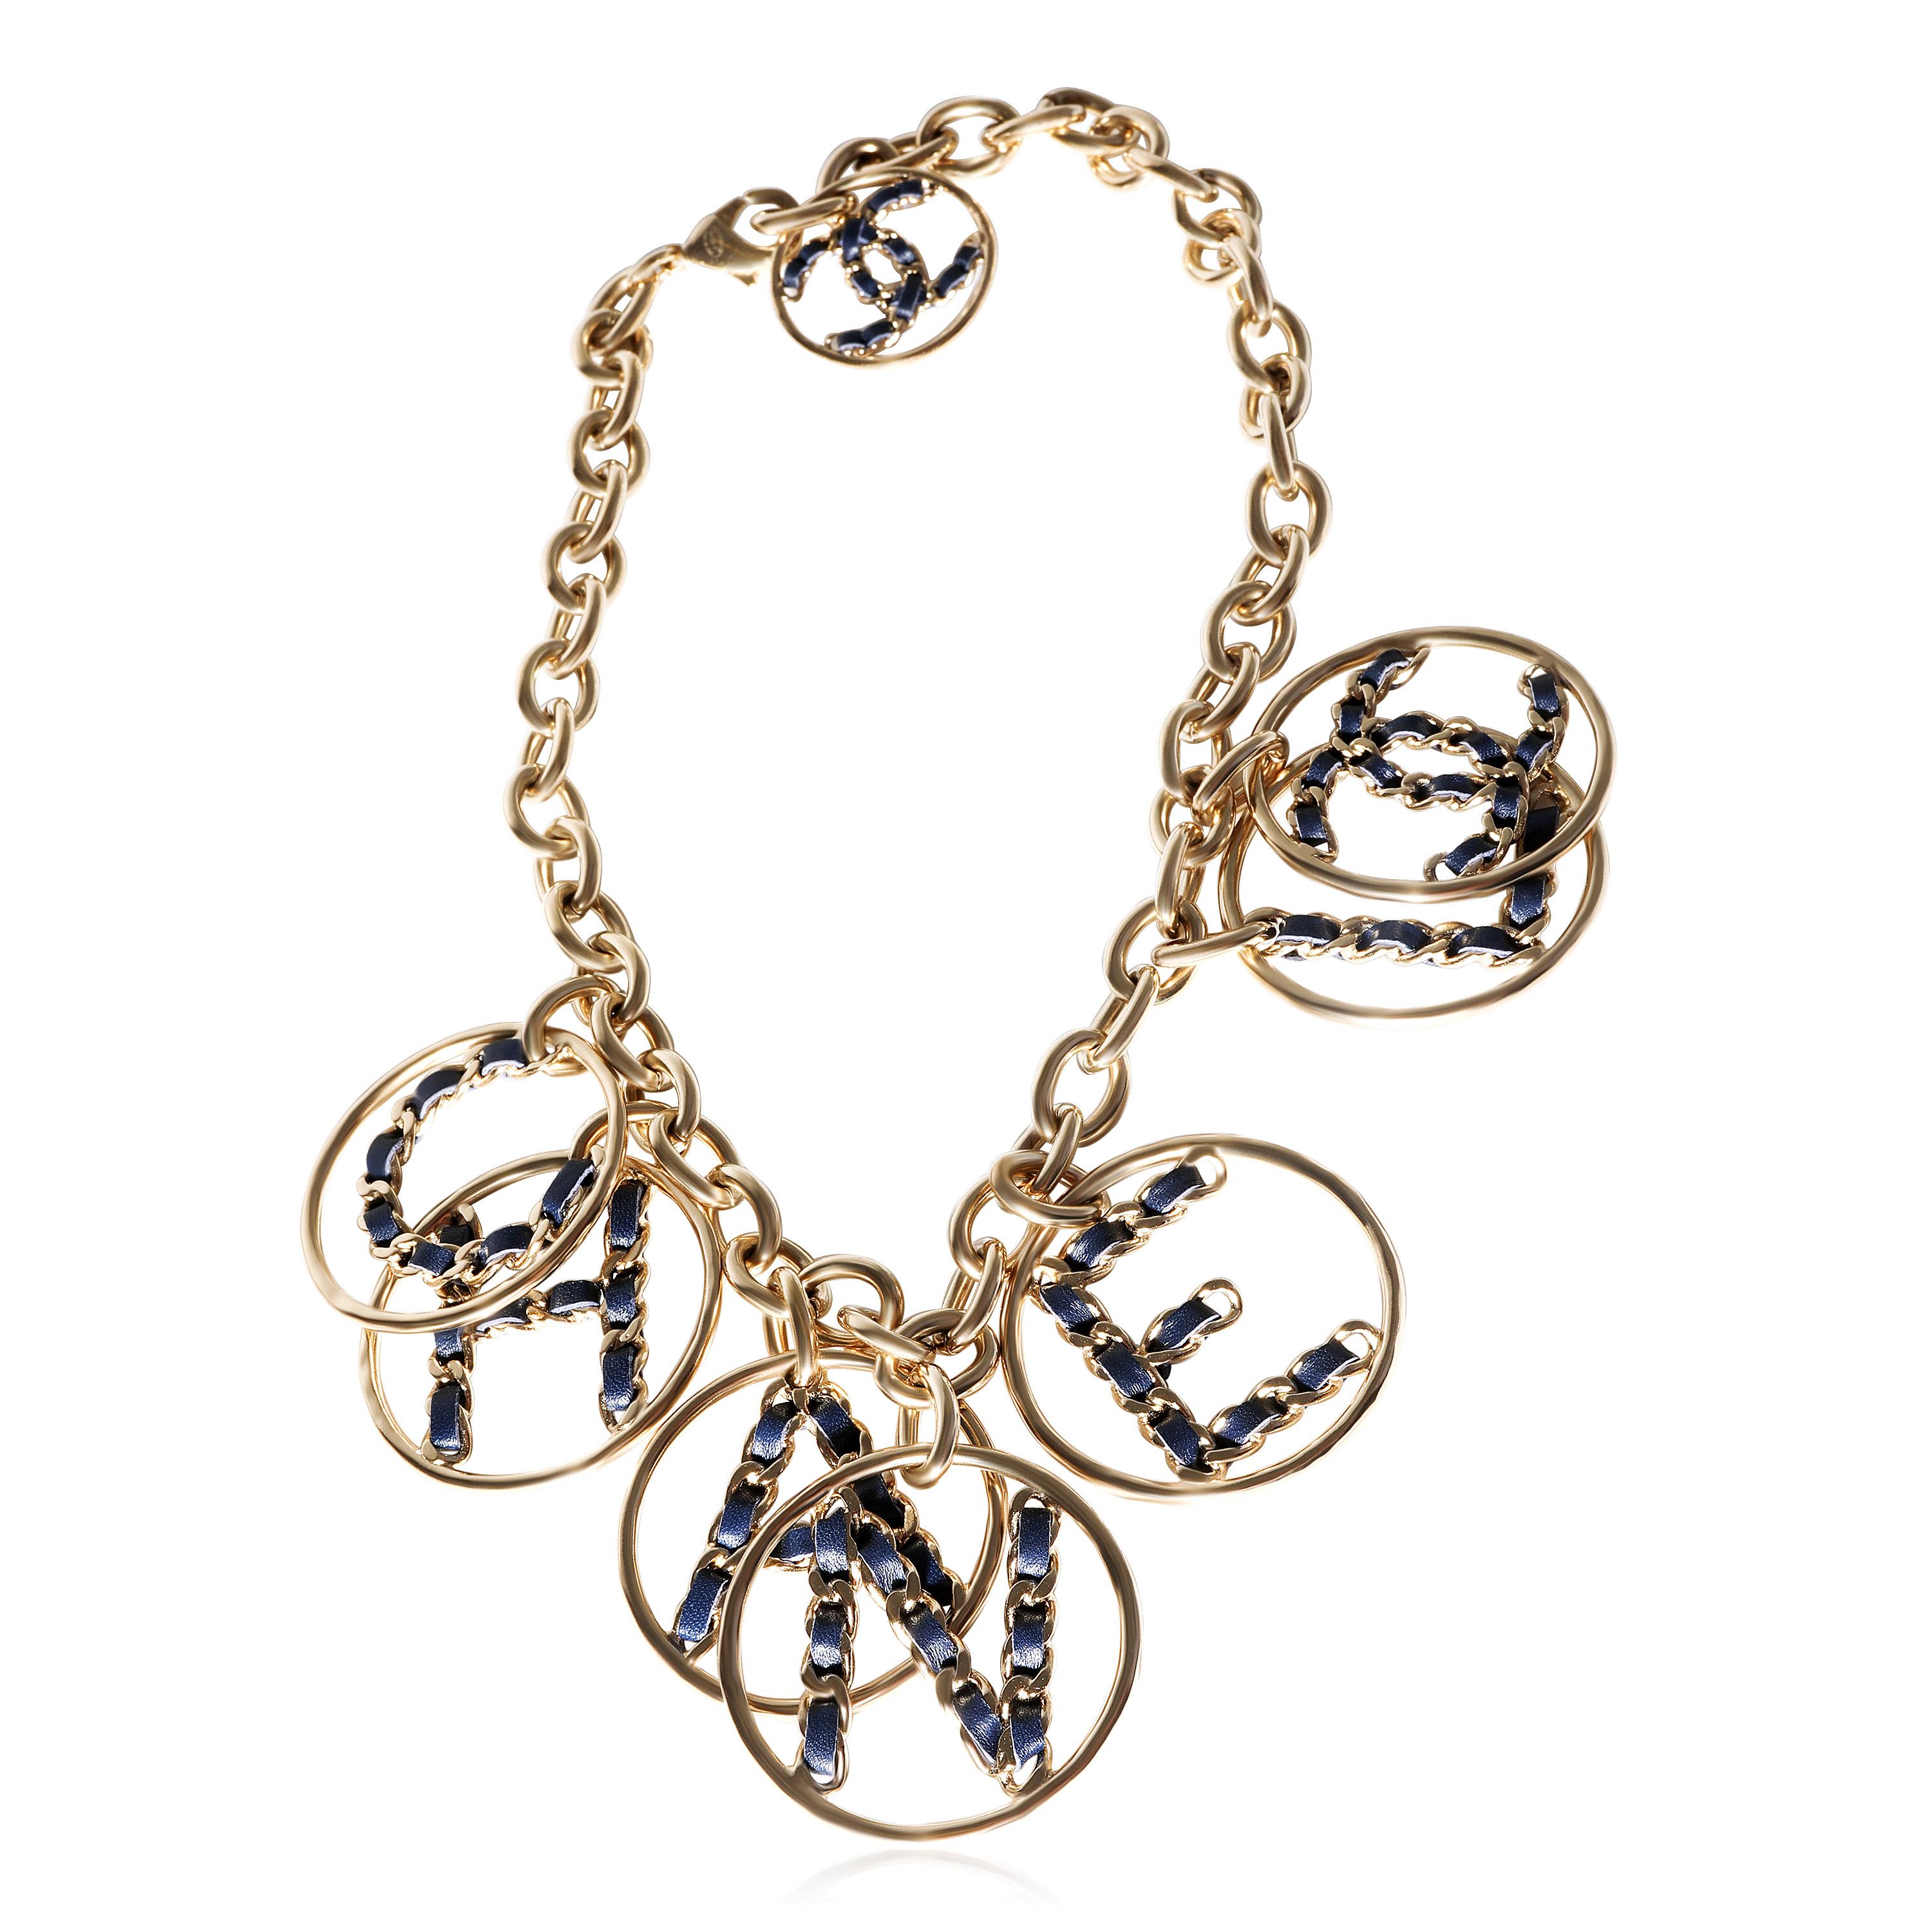 Chanel 2019 CC Leather Charm Gold Tone Necklace

PRIMARY DETAILS
SKU: 120301
Listing Title: Chanel 2019 CC Leather Charm Gold Tone Necklace
Condition Description: Retails for 1850 USD. In excellent condition. Chain is 18 inches in length.Comes with